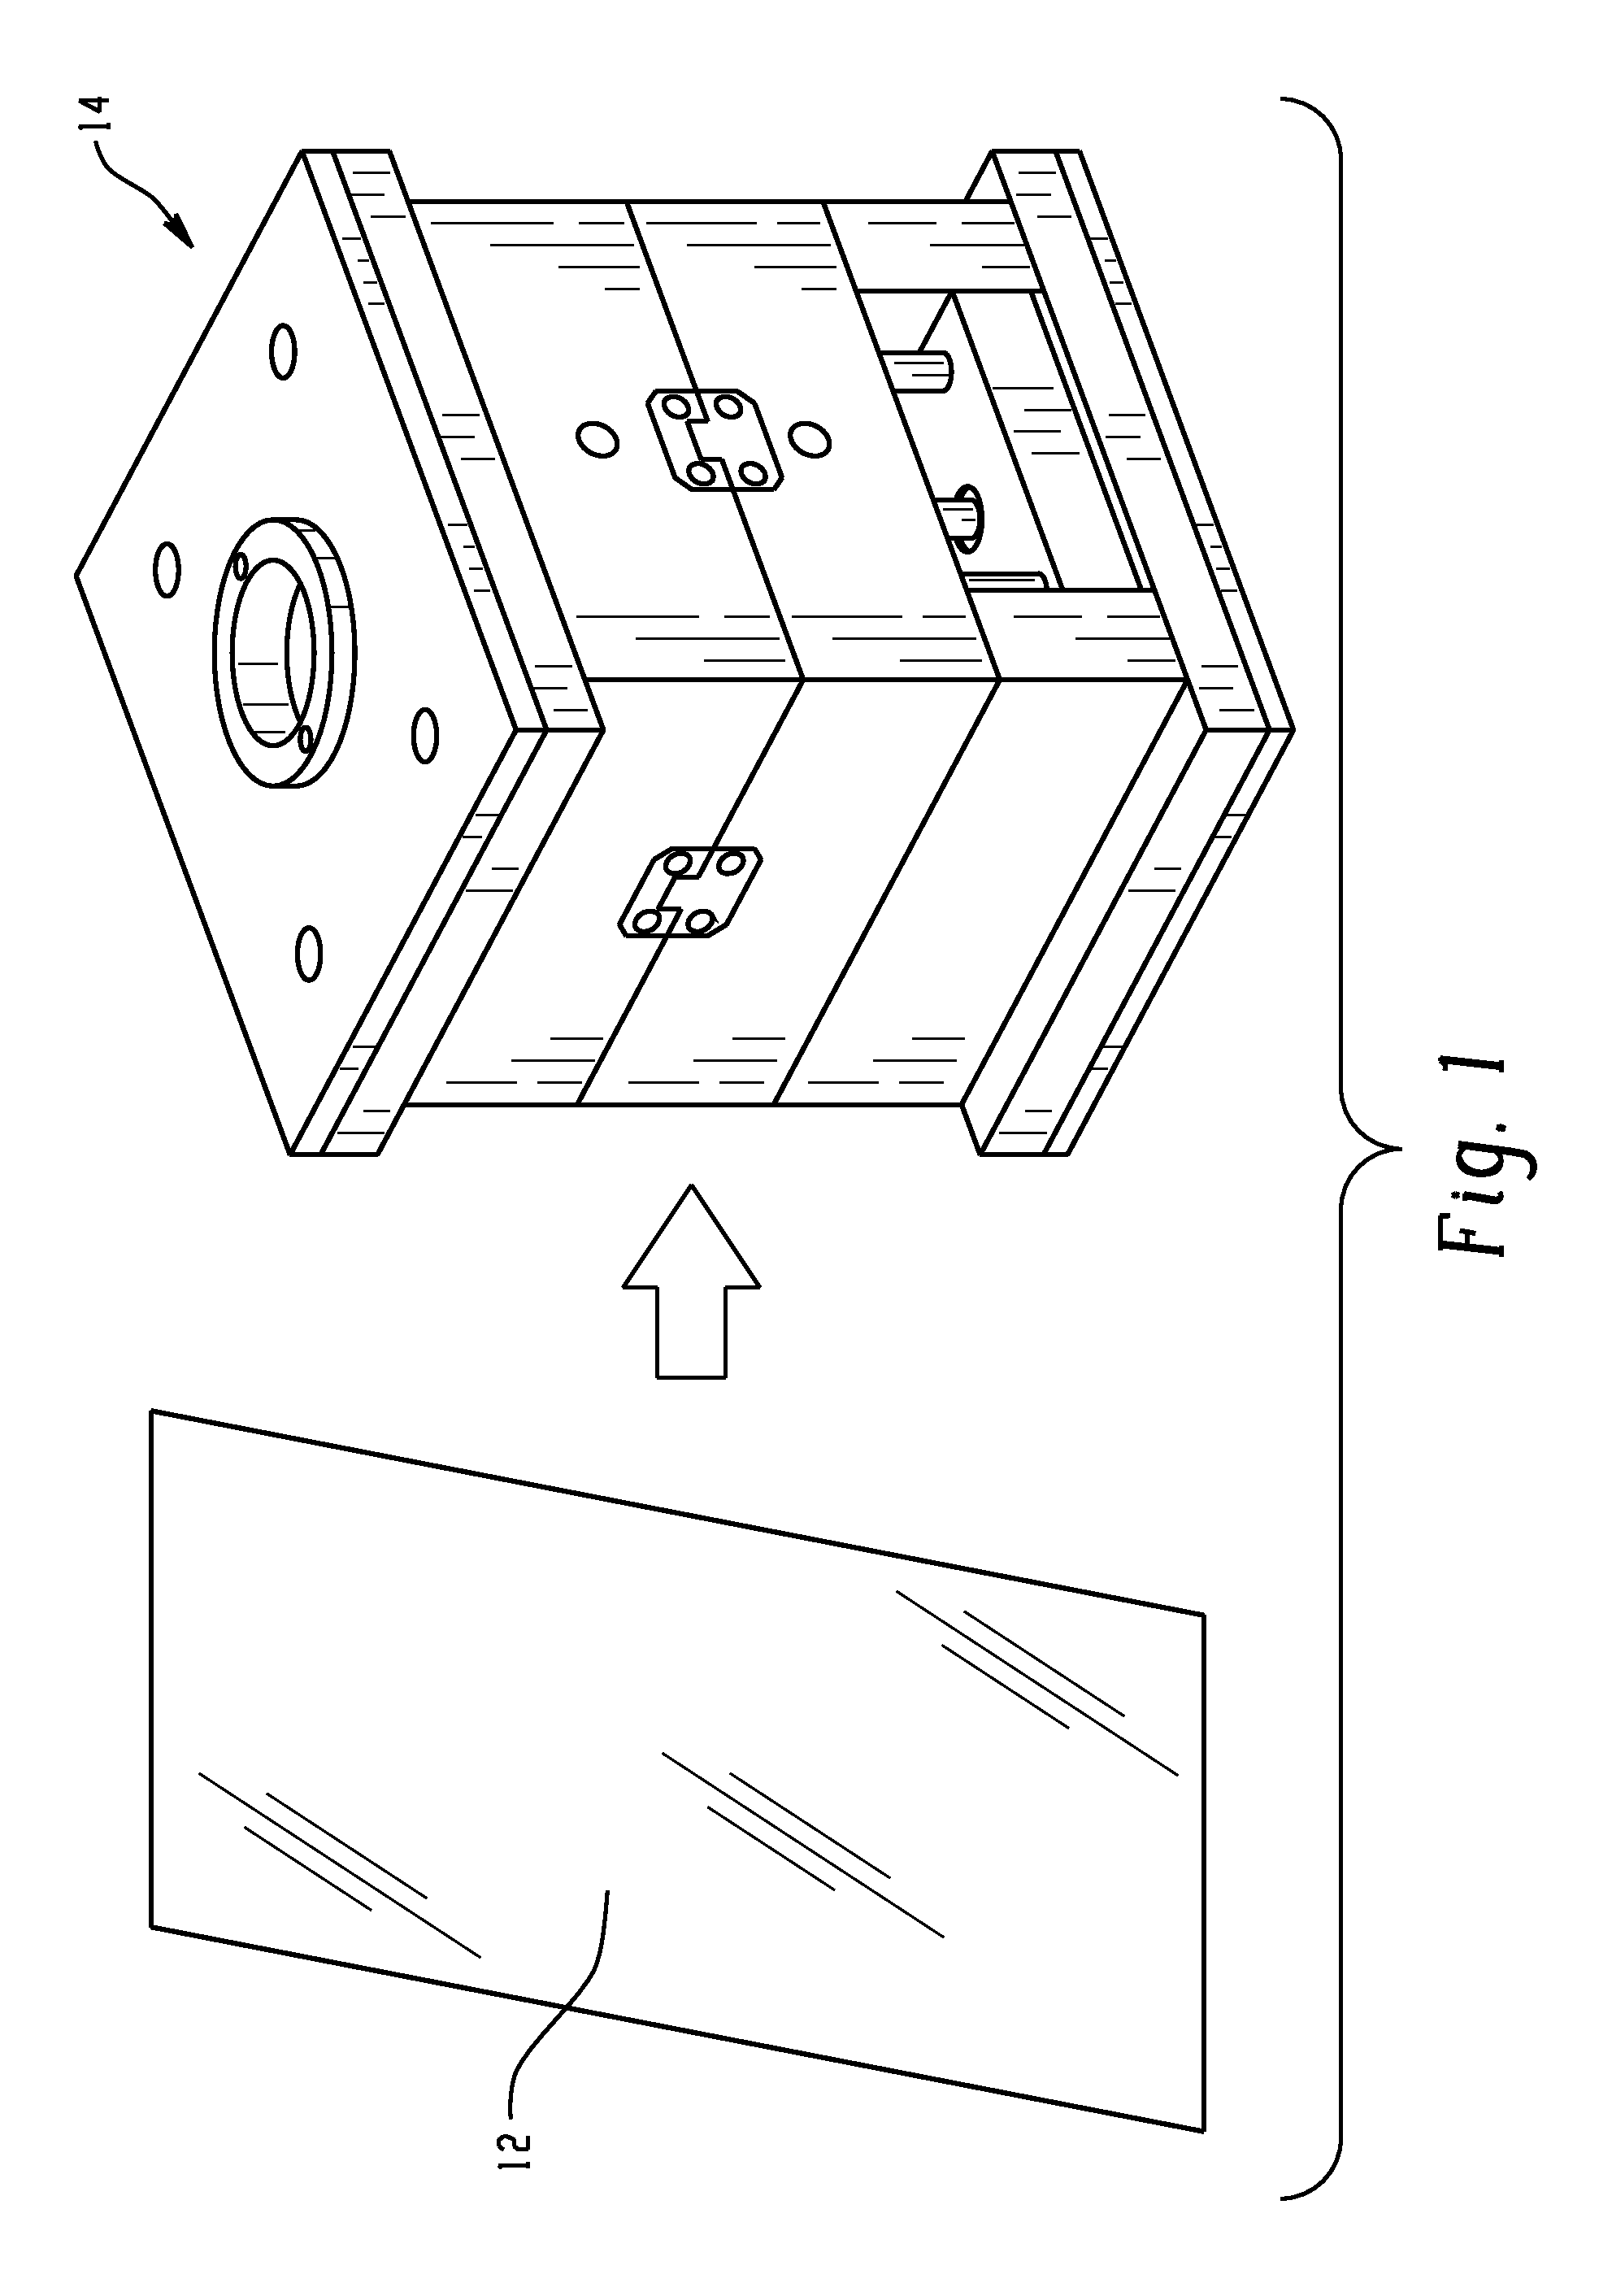 Molded article having enhanced aesthetic effect and method and system for making the molded article